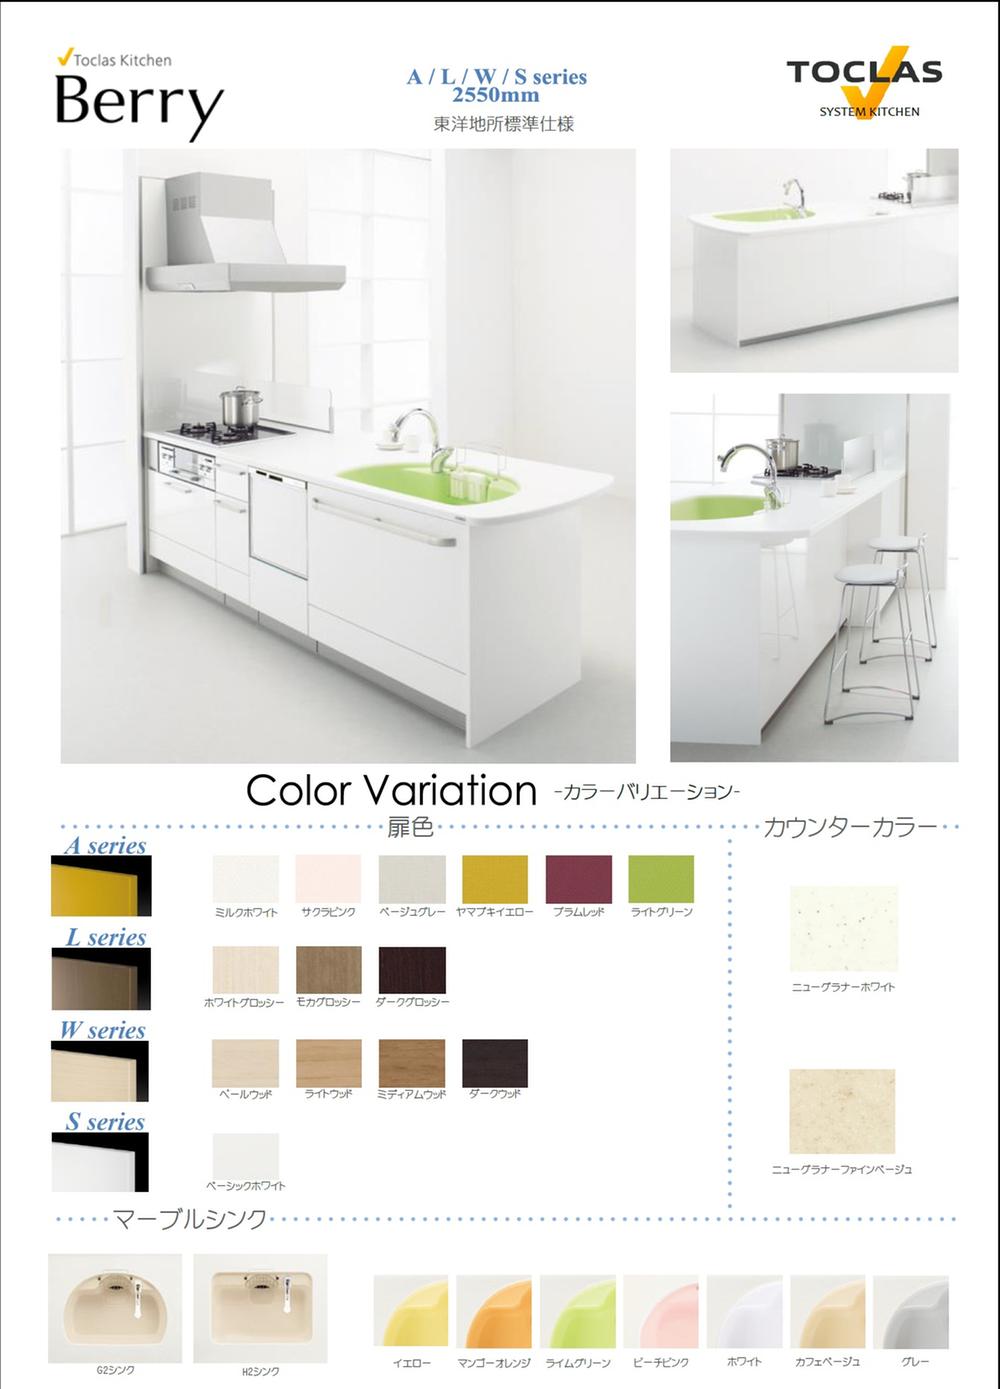 Kitchen. "Toyo-town green Ward Otaka south" [1 ・ No. 2 place] Toklas ・ System kitchen standard specification example